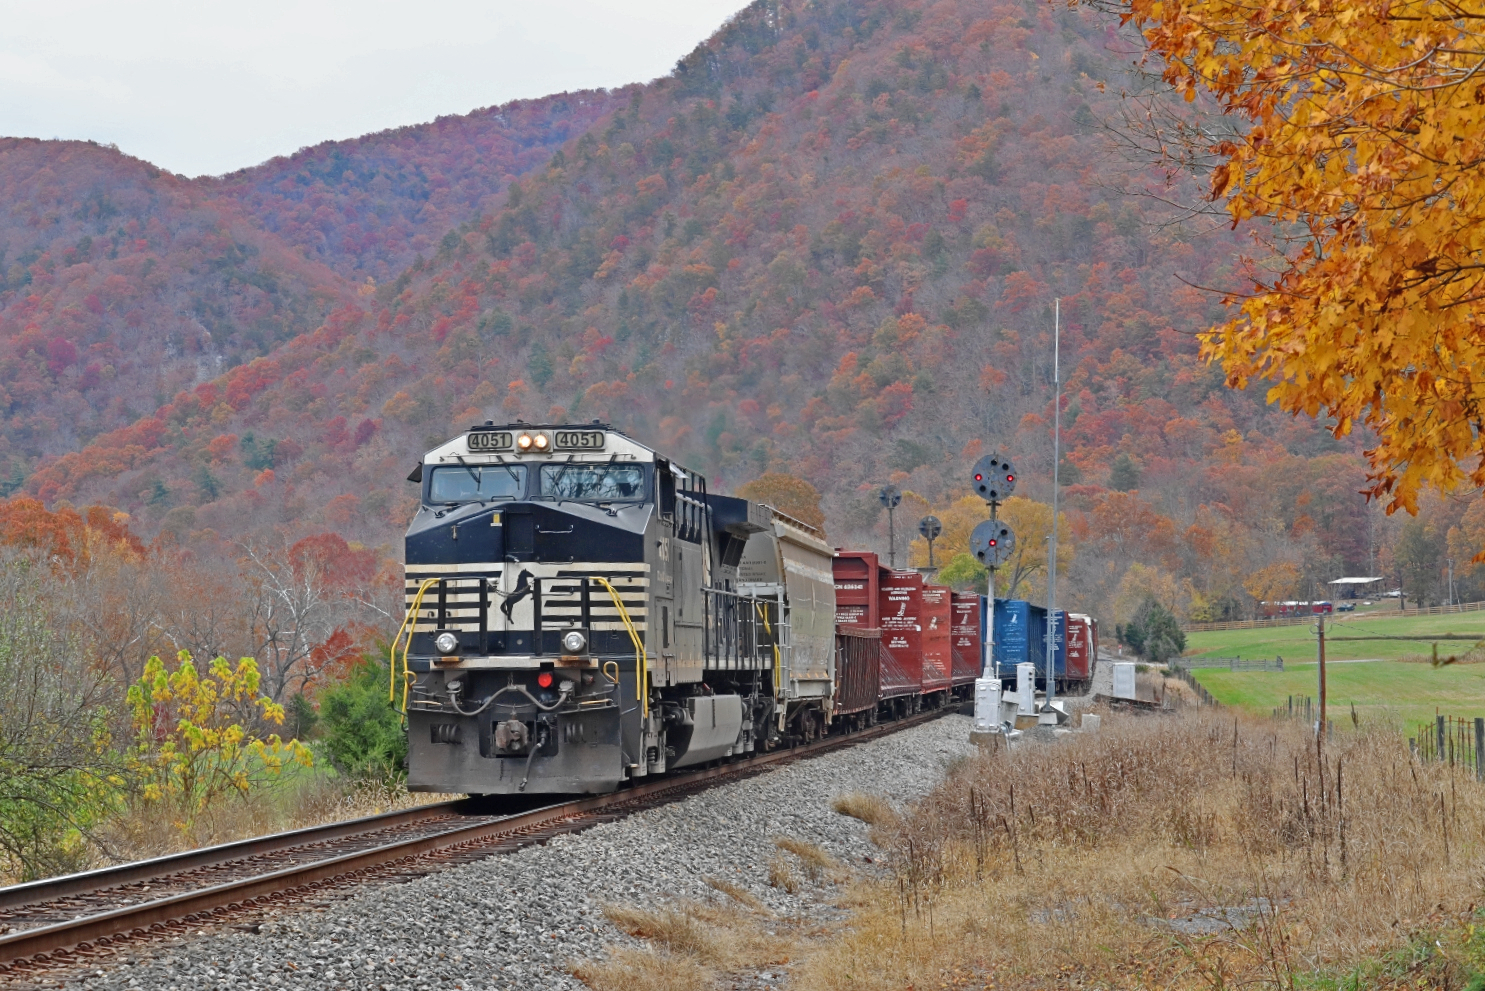 NS 4051 is a class GE AC44C6M and  is pictured in Arcadia, Virginia, USA.  This was taken along the NS Hagerstown District/line on the Norfolk Southern. Photo Copyright: Robby Lefkowitz uploaded to Railroad Gallery on 11/12/2022. This photograph of NS 4051 was taken on Saturday, October 29, 2022. All Rights Reserved. 